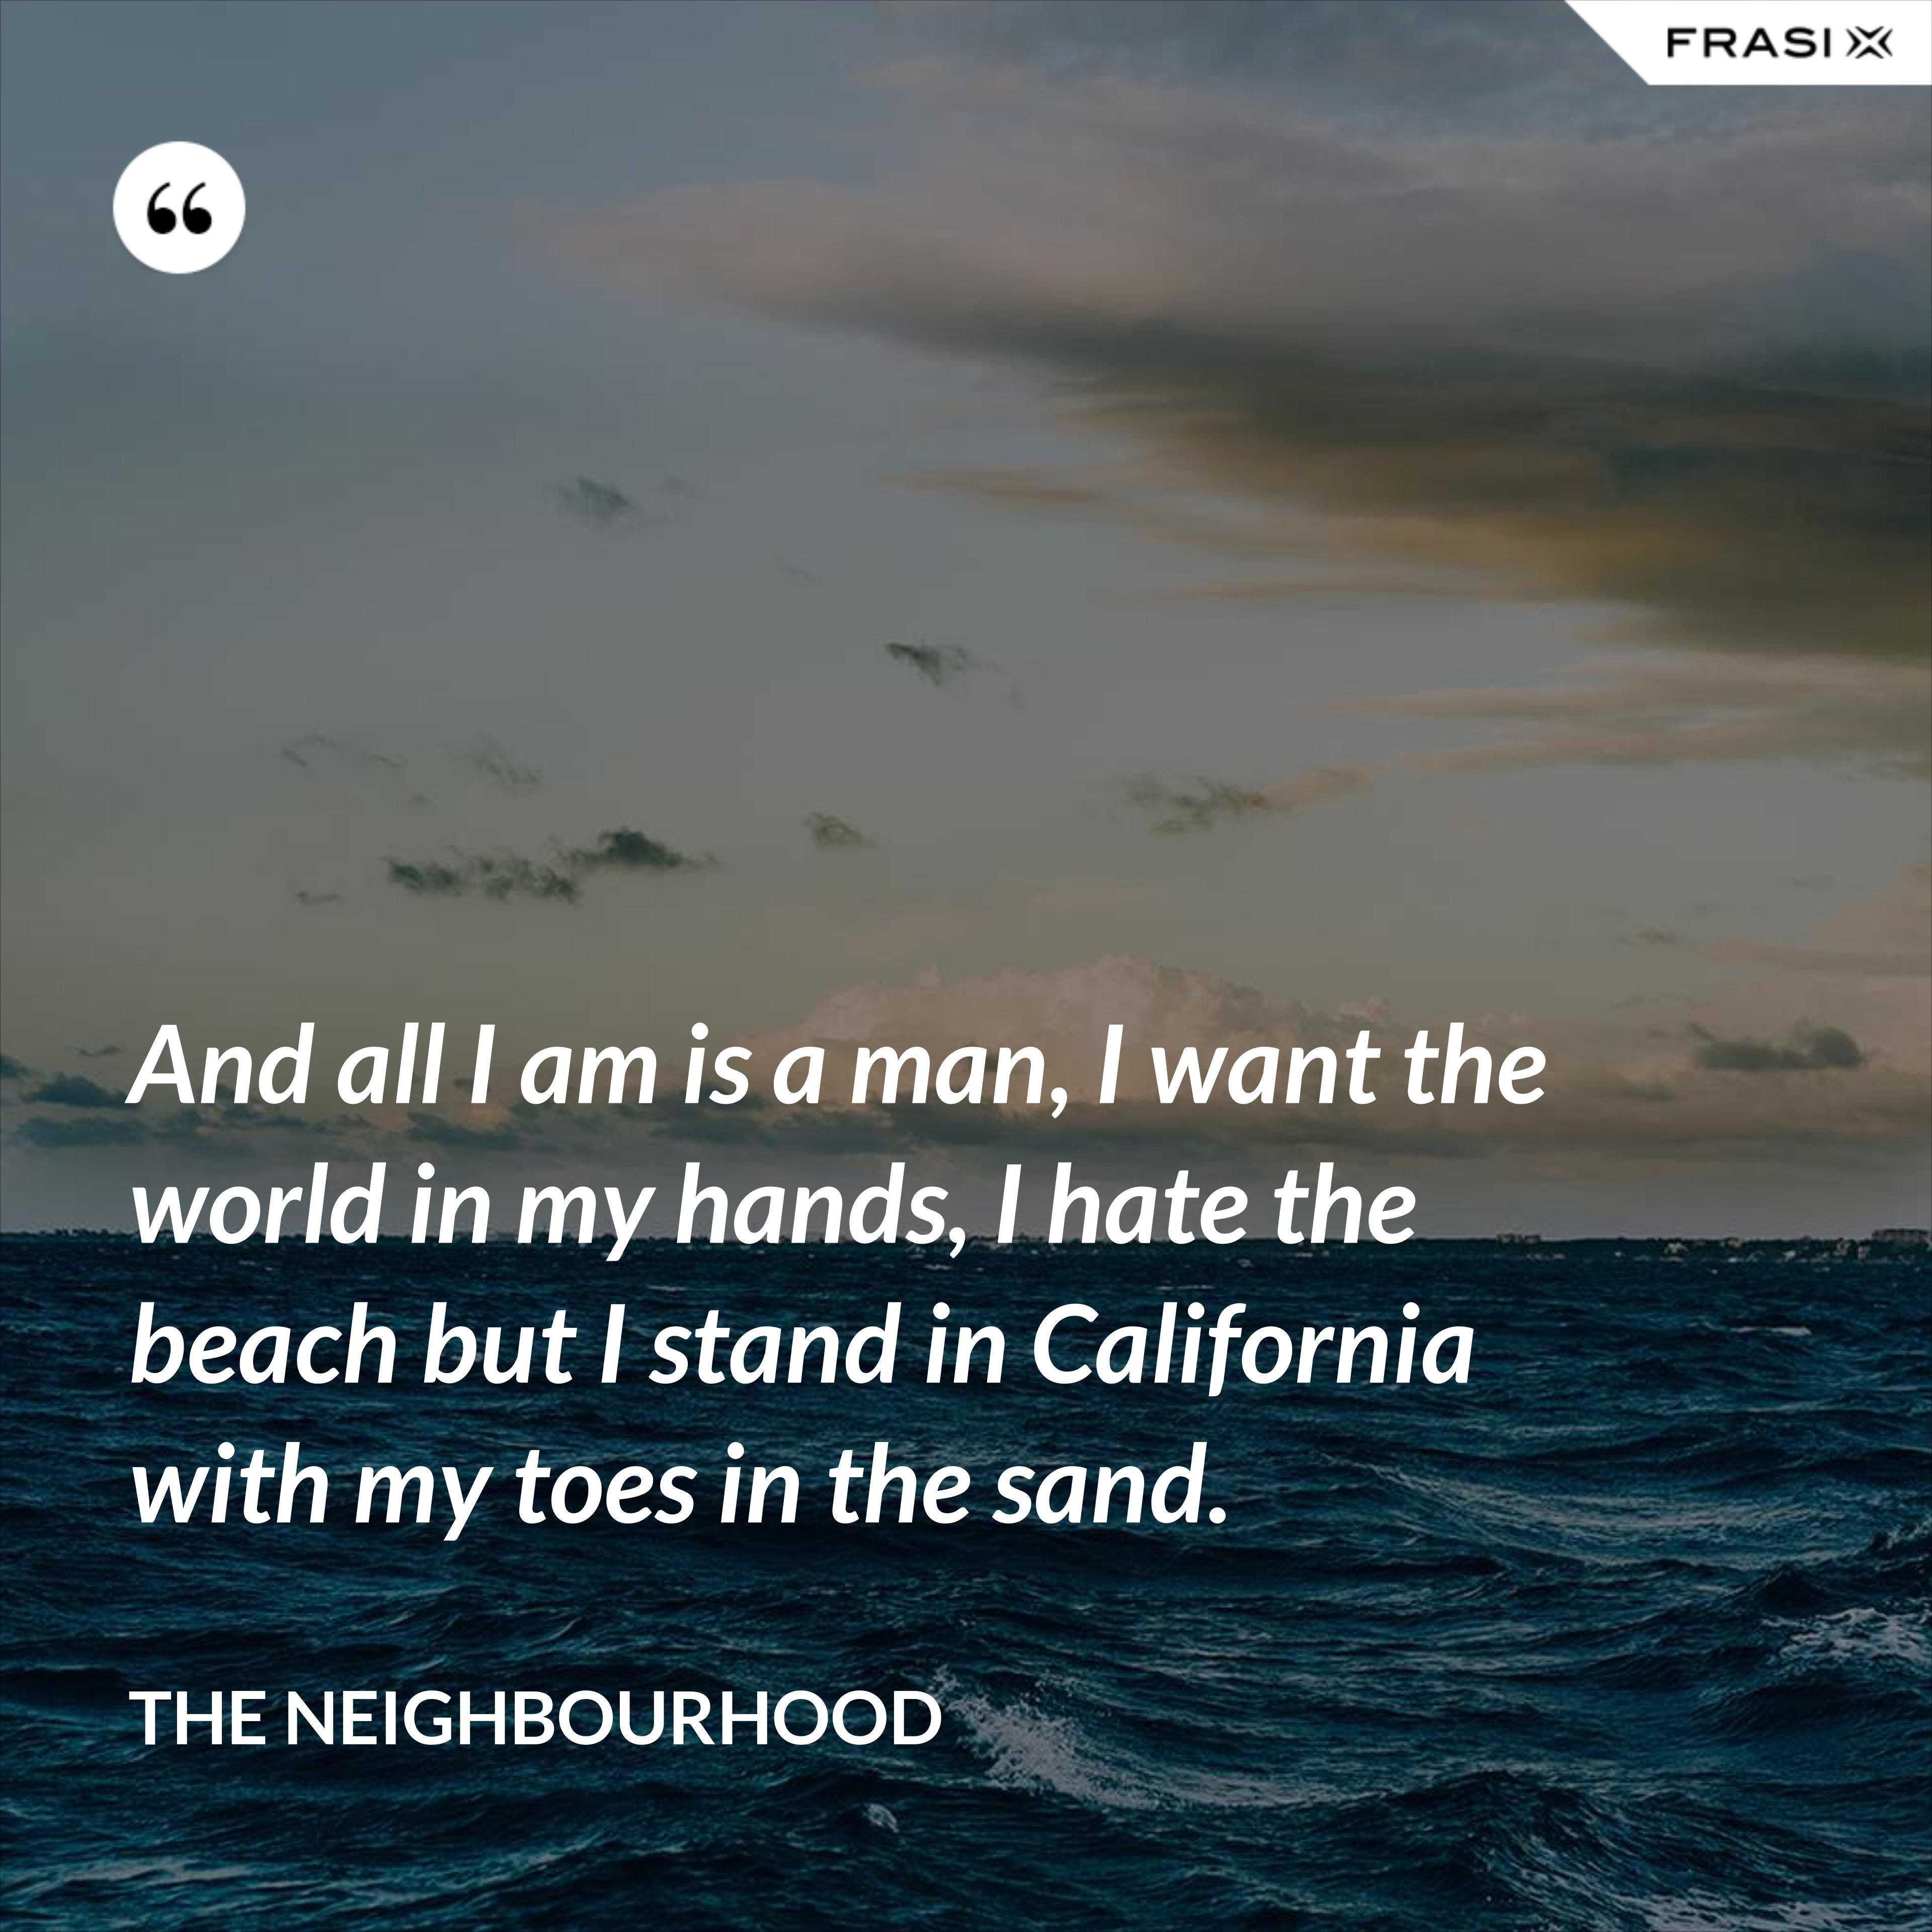 And all I am is a man, I want the world in my hands, I hate the beach but I stand in California with my toes in the sand. - The Neighbourhood